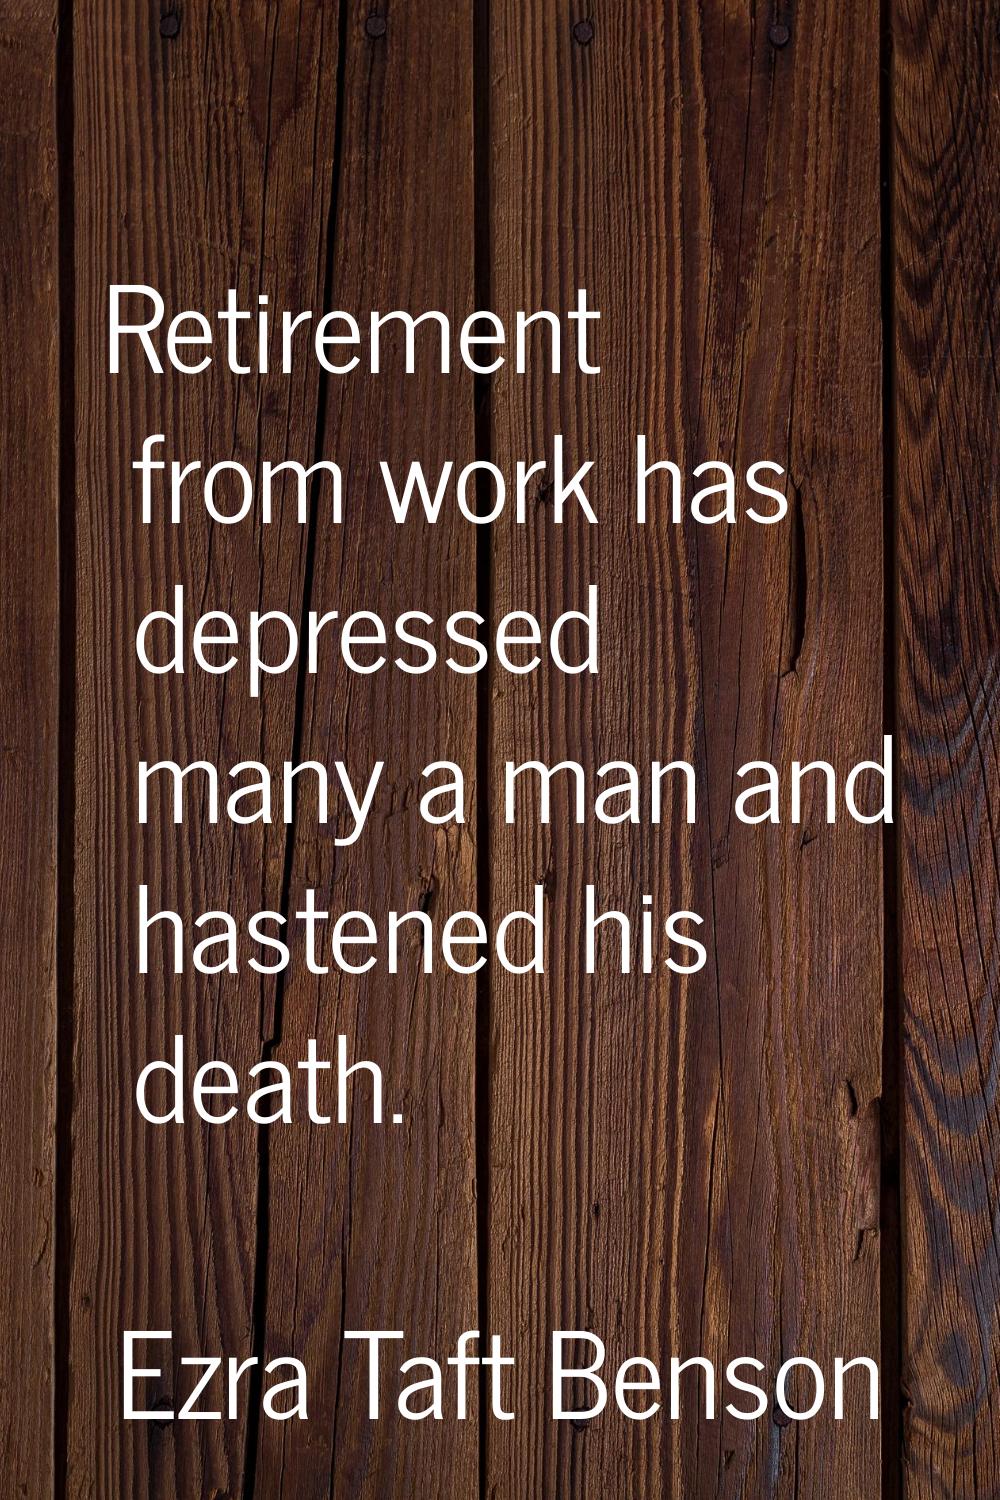 Retirement from work has depressed many a man and hastened his death.